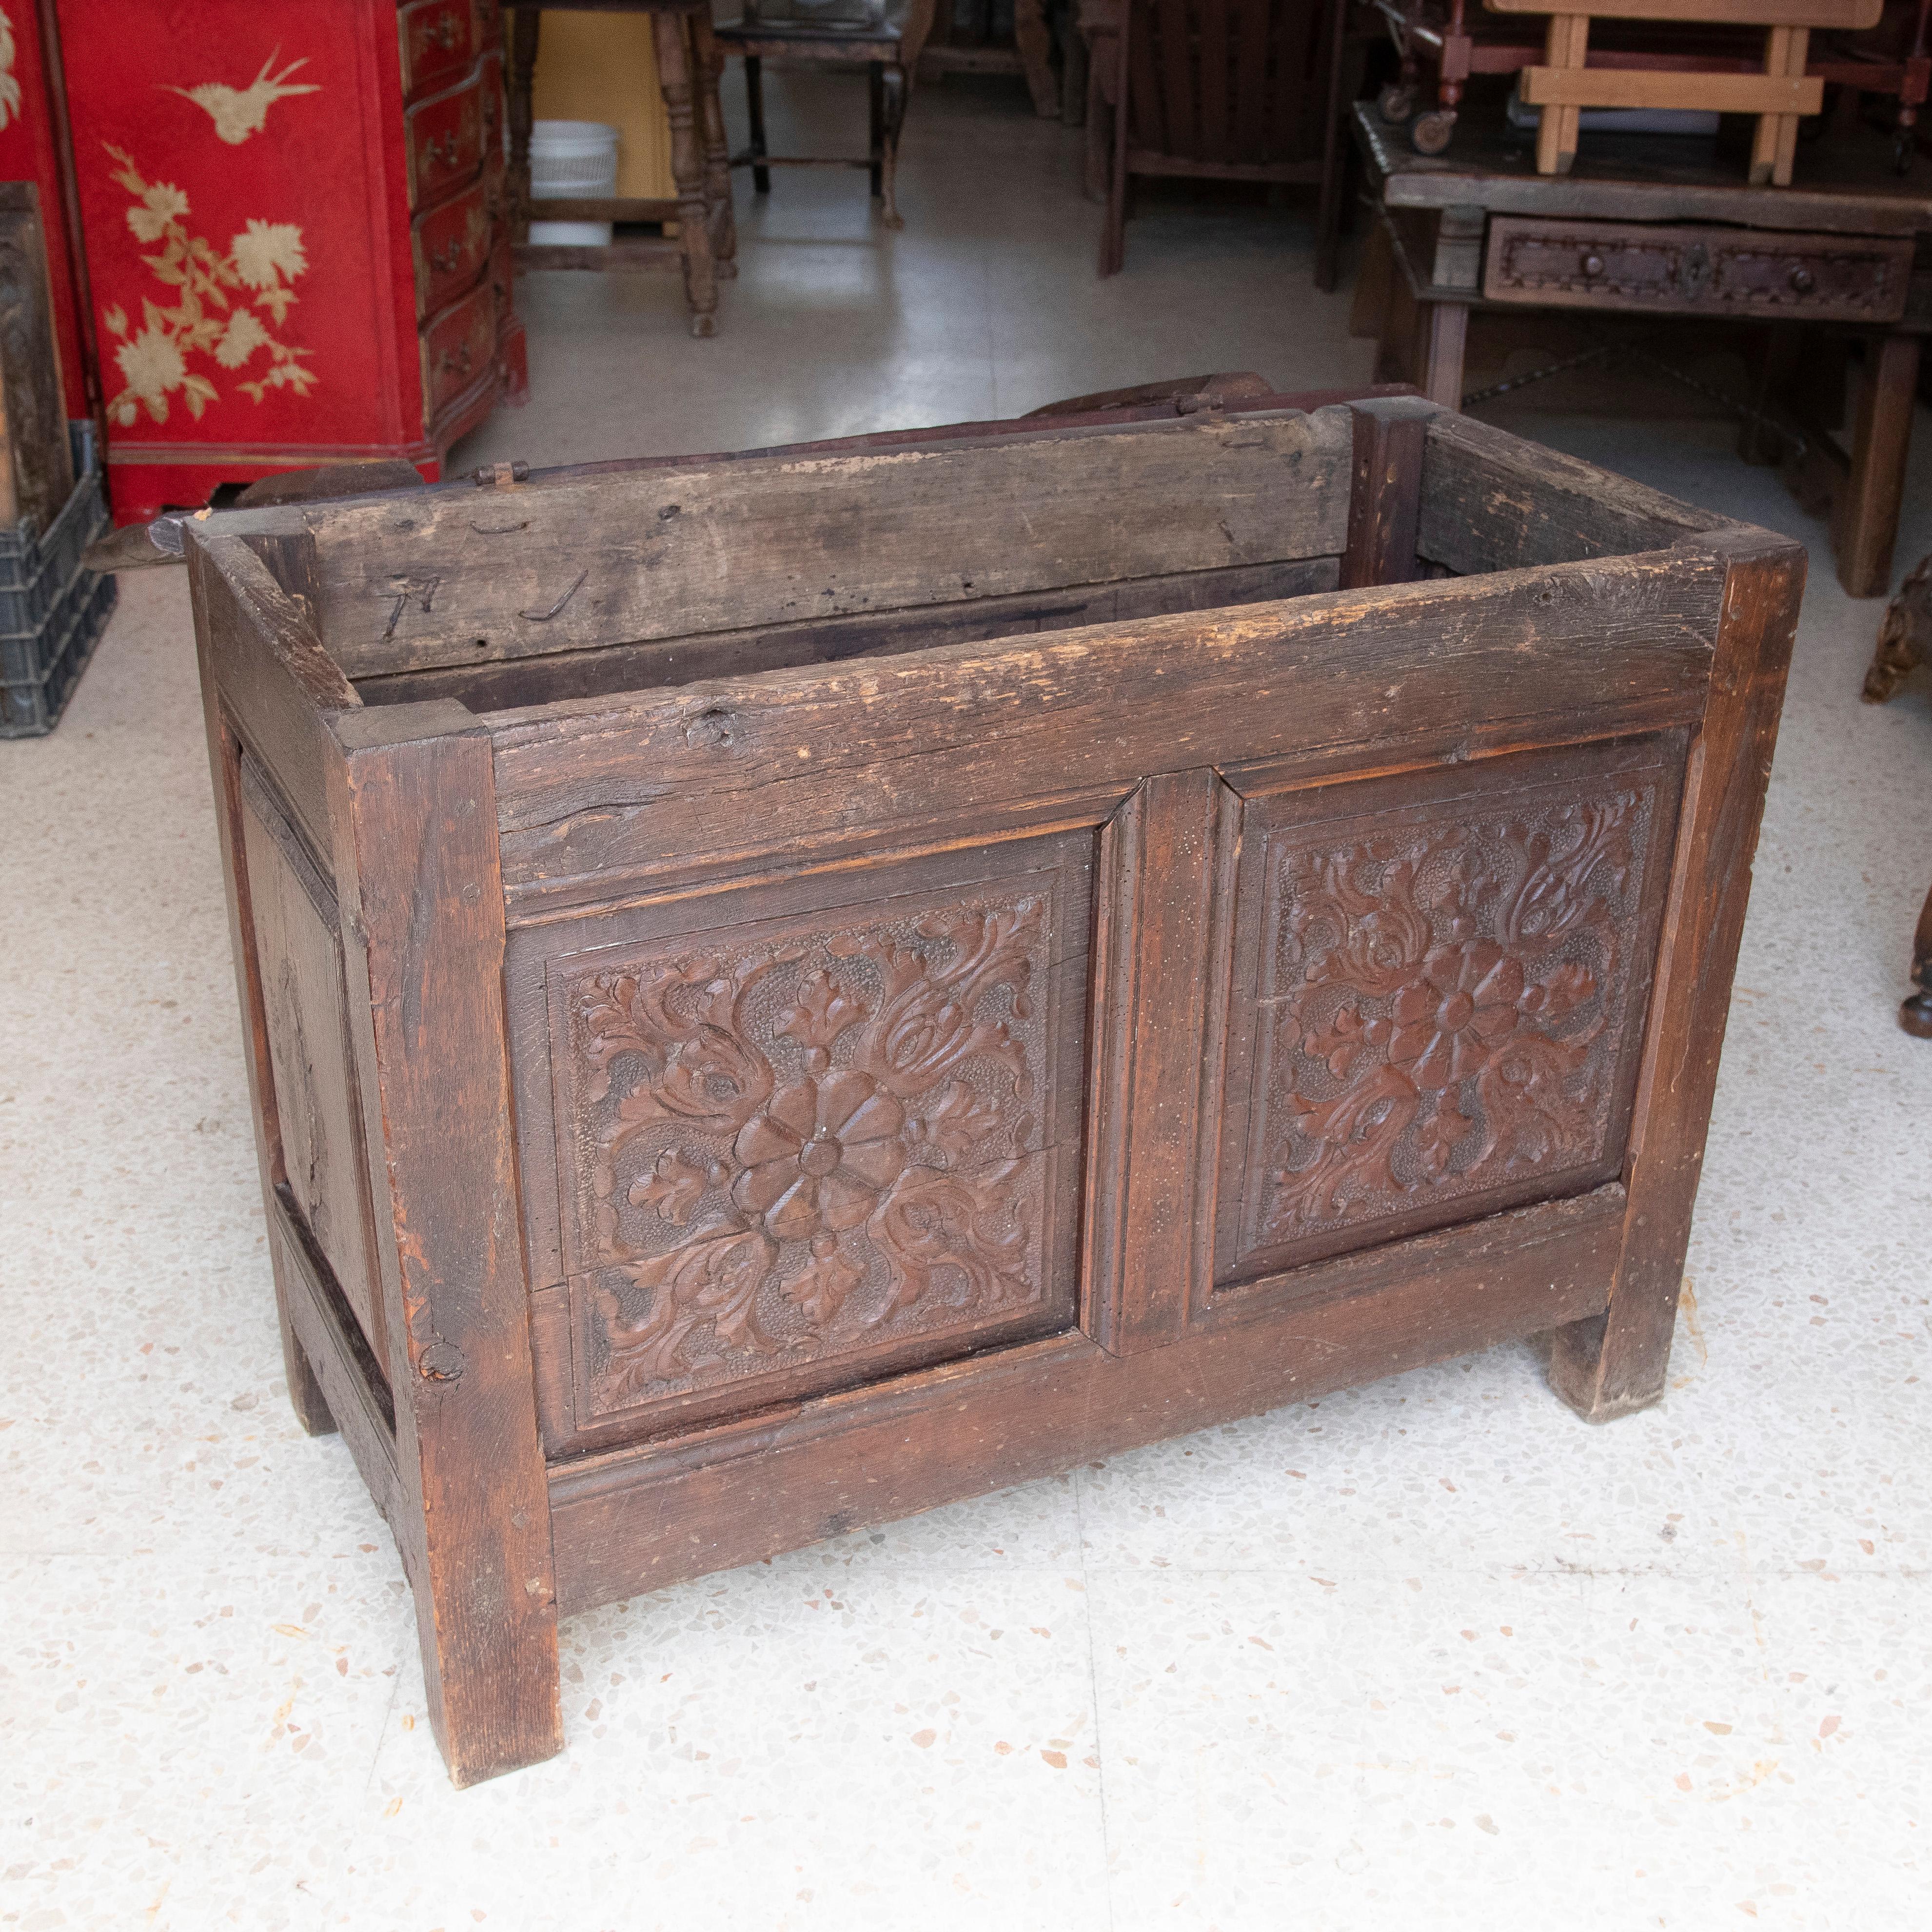 19th century hand-carved wooden trunk.